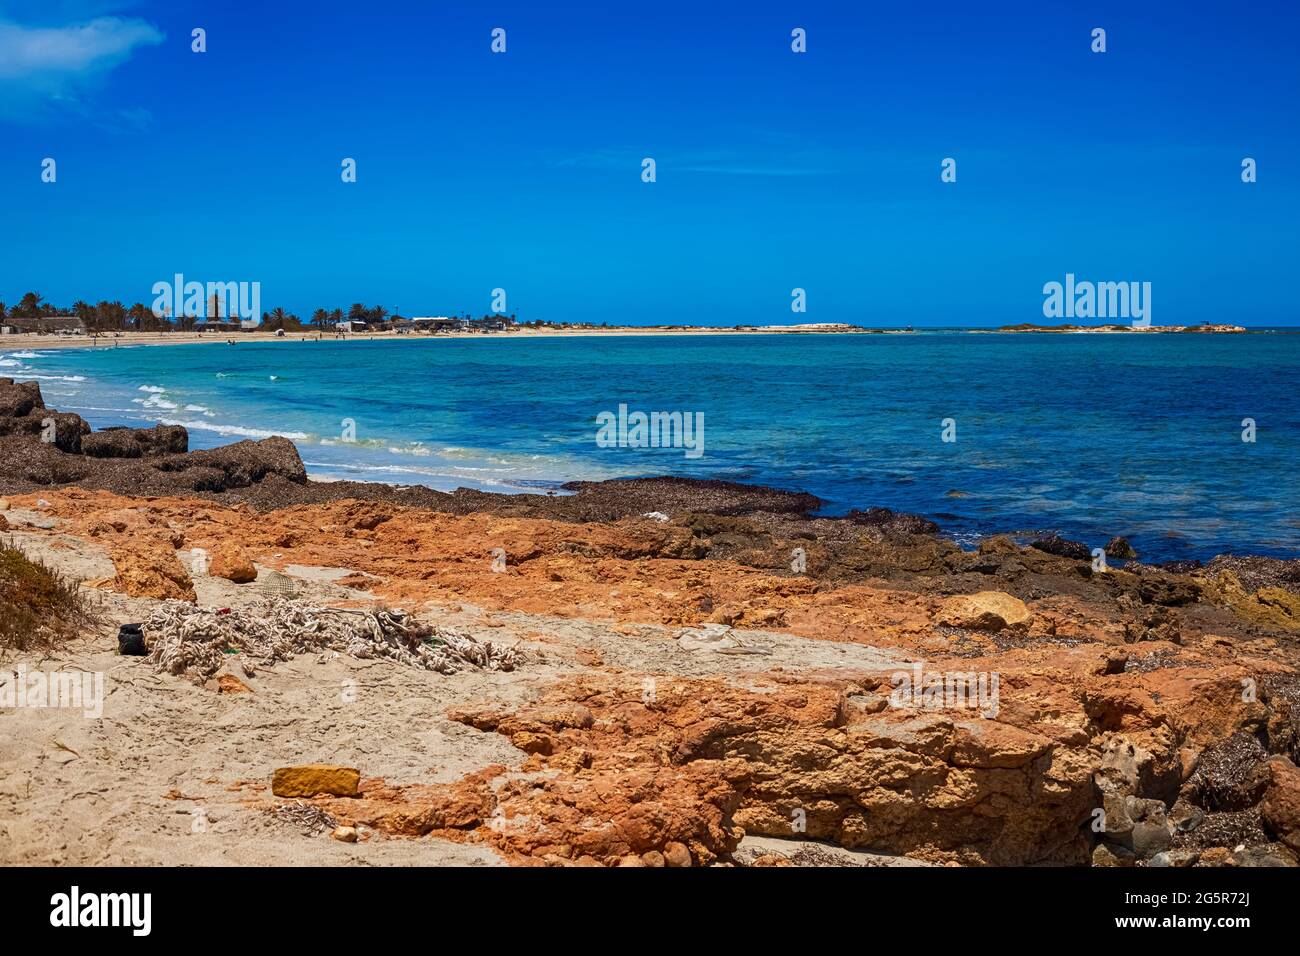 A beautiful view of the Mediterranean coast with birch water, a beach with white sand and a green palm tree. Stock Photo